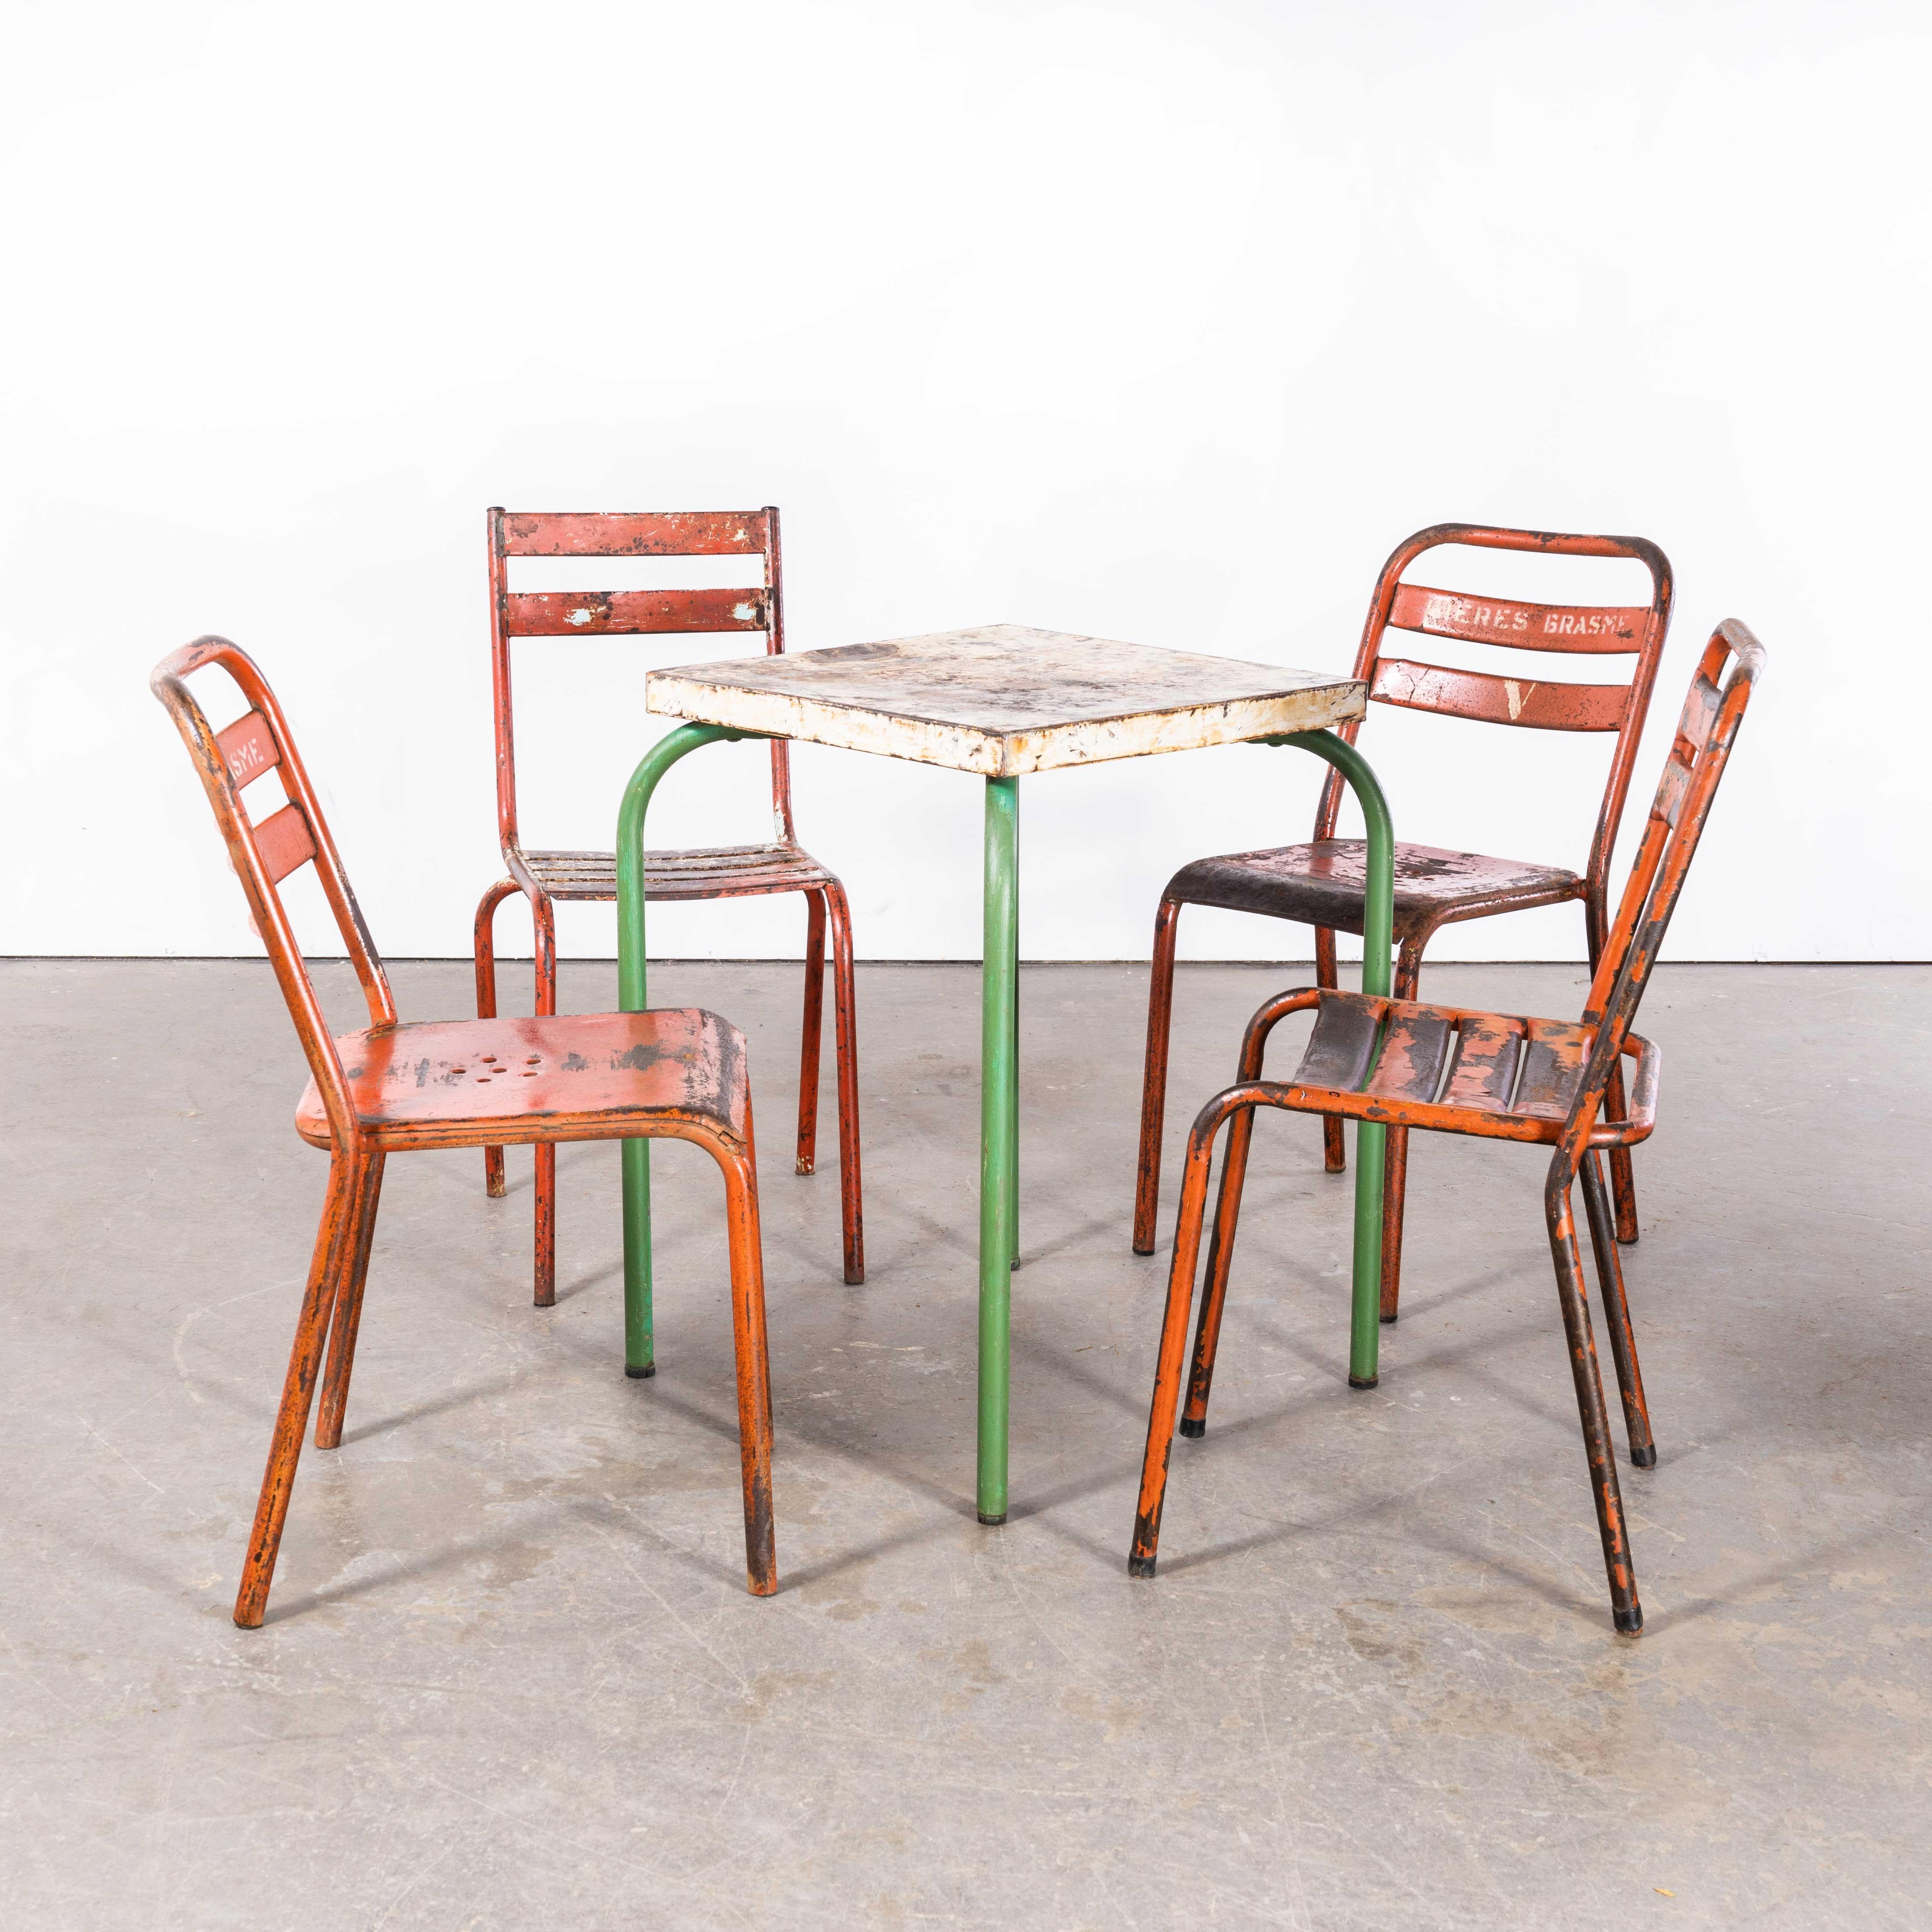 Metal 1950's Original French Outdoor Table And Chair Set - Four Chairs For Sale